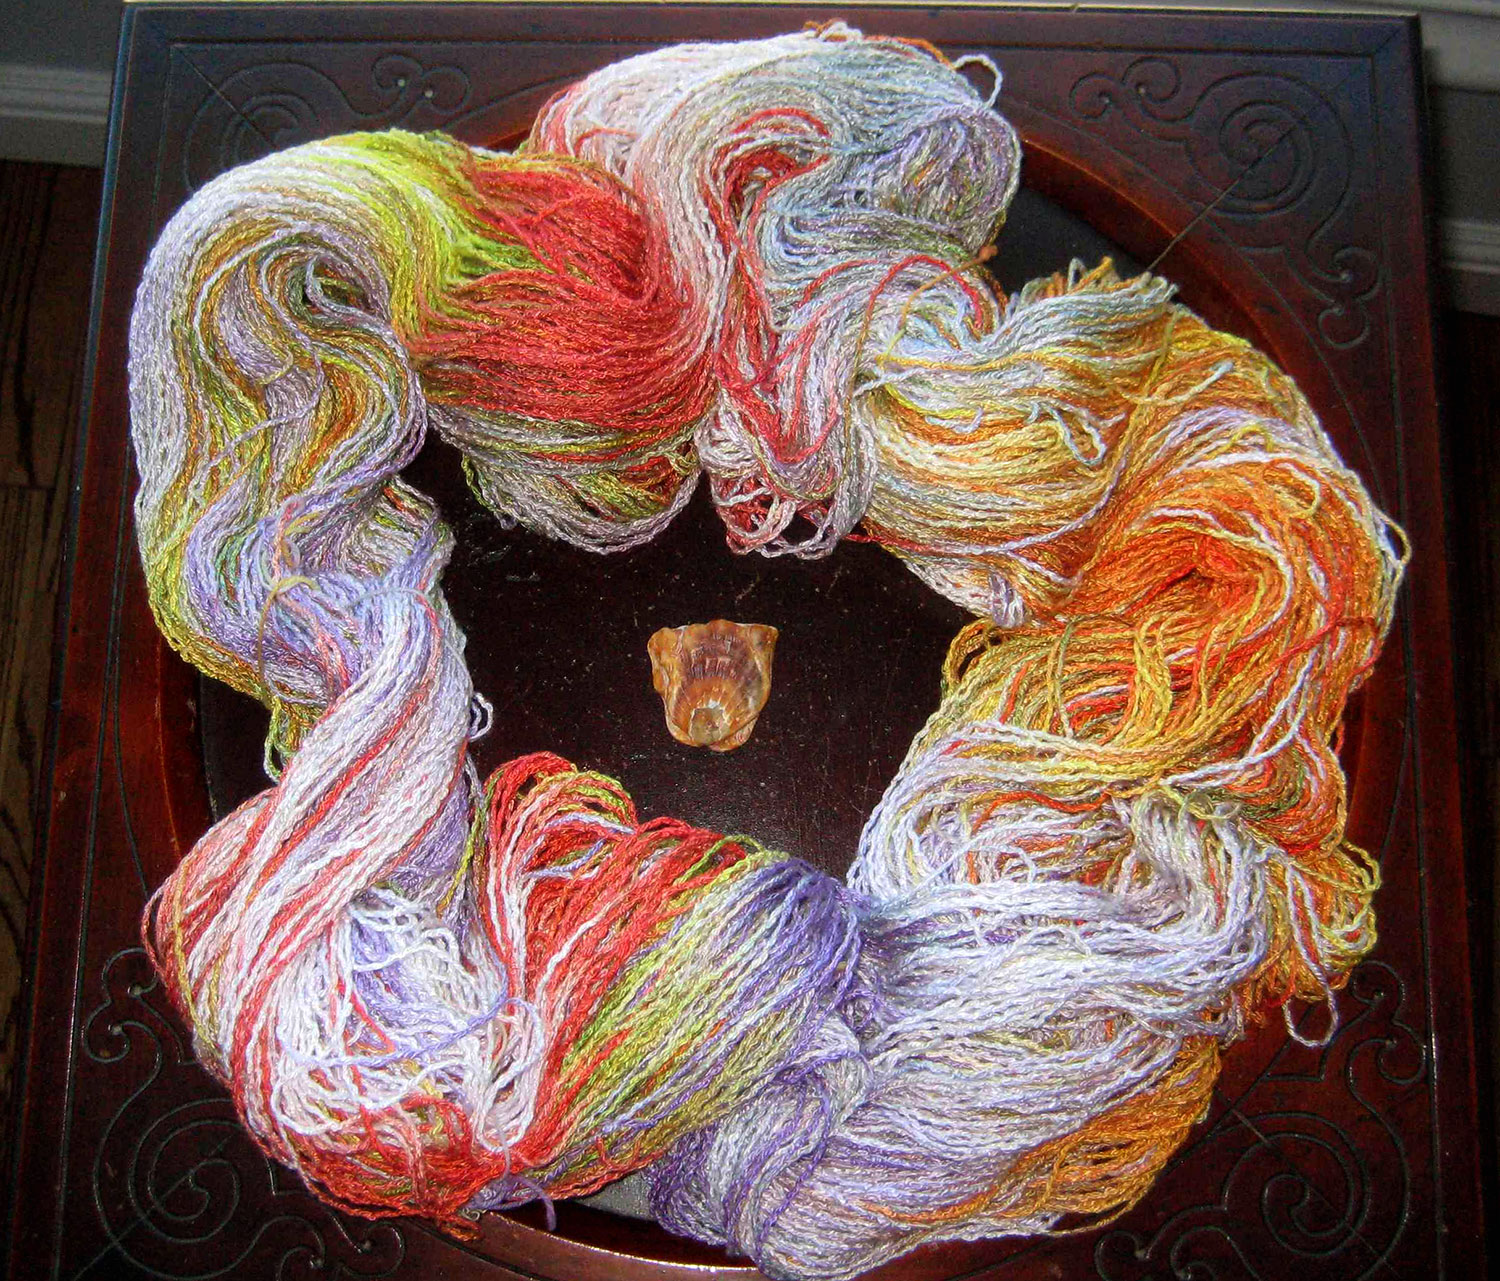 Jacquard Acid Dyes [DG-JA] : Earthsong Fibers, Your source for spinning,  weaving, knitting, crocheting, carding, dyeing, felting, yarns, fibers,  books, and videos